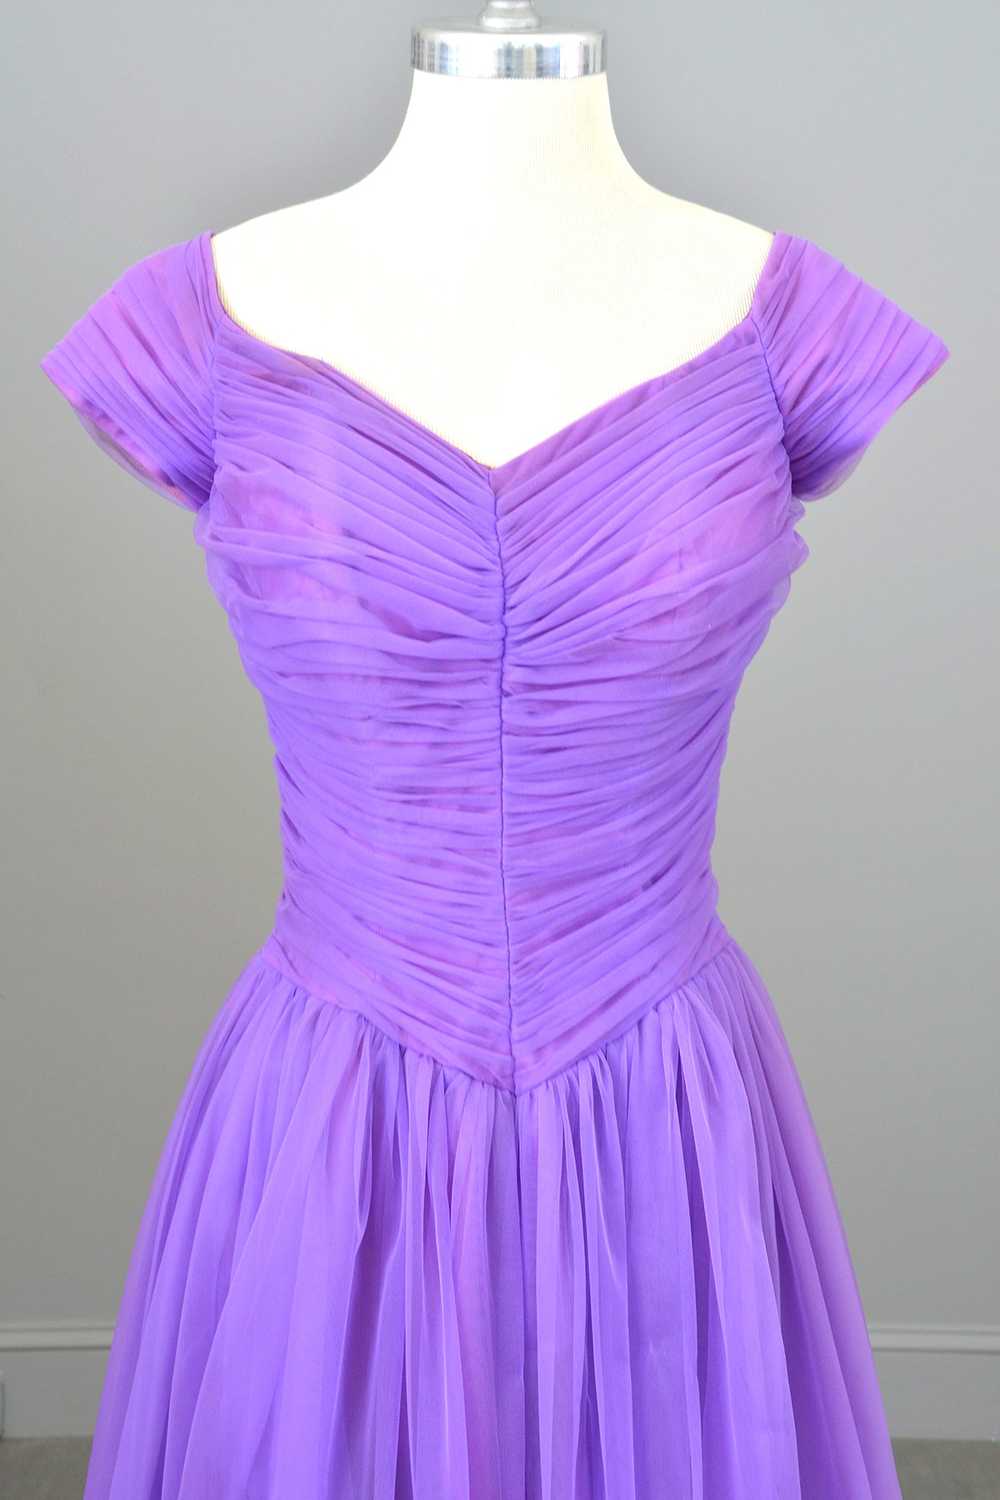 1960s 70s Vibrant Purple Ruched Party Dress - image 2